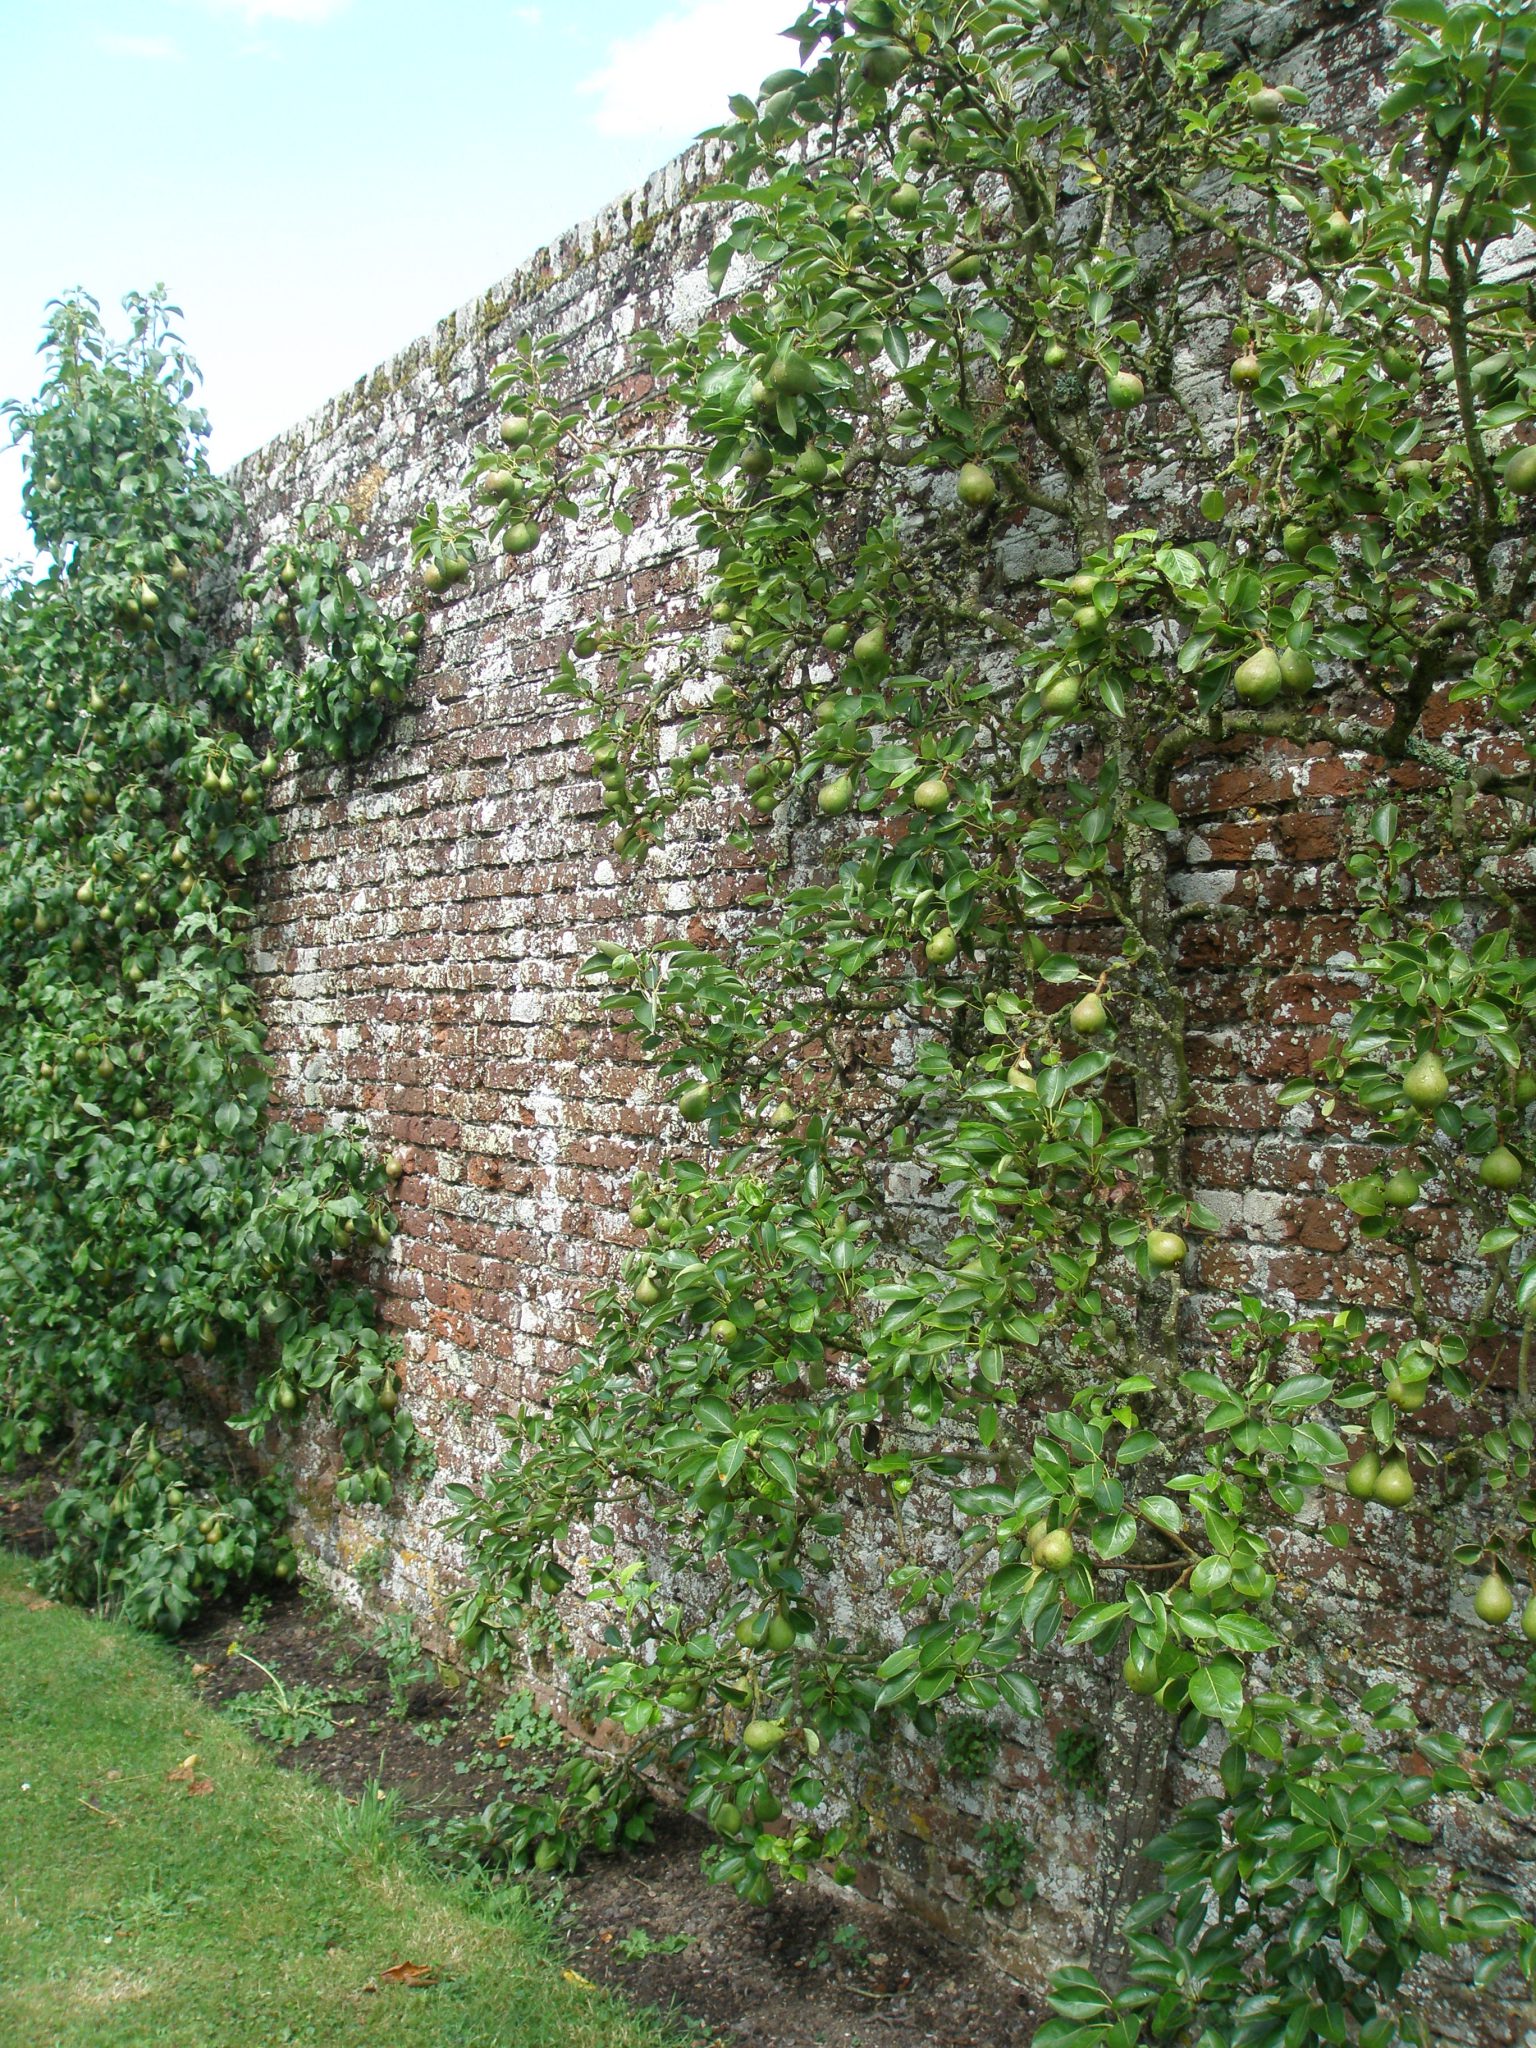 Kent is renowned for its fruit. Here, pears are espaliered against a brick wall.